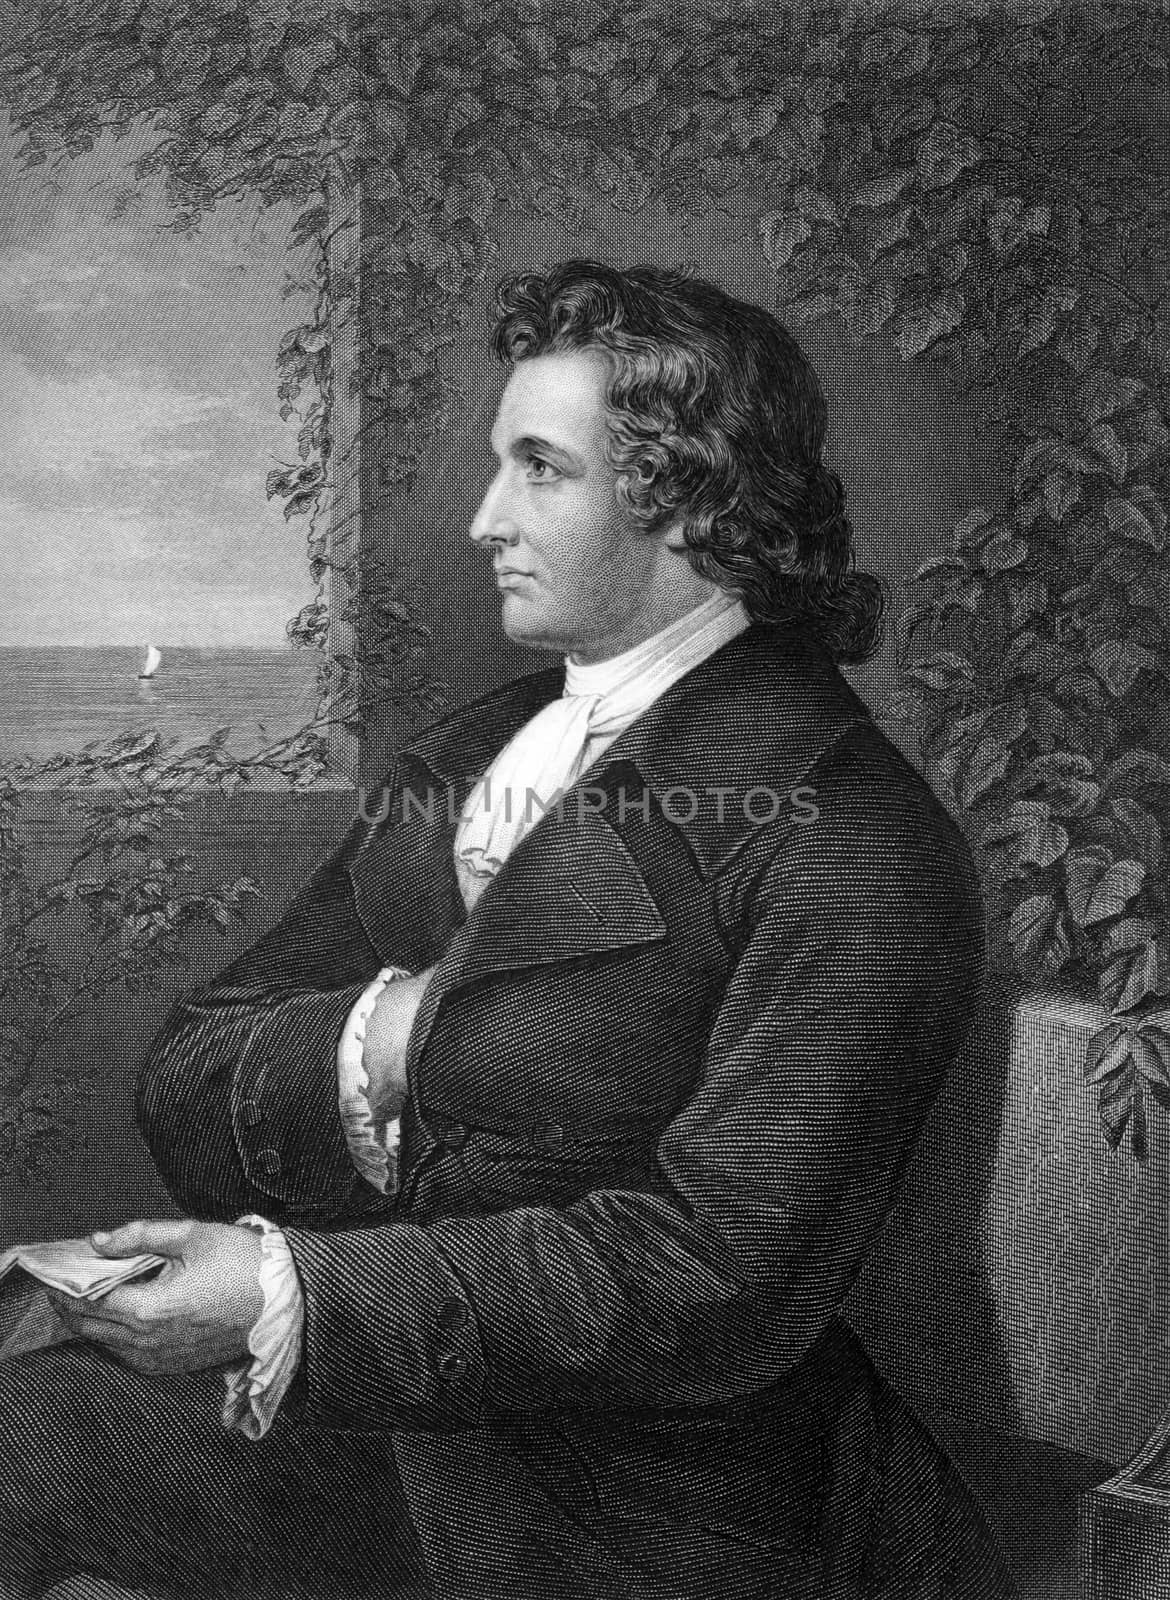 Johann Wolfgang von Goethe (1749-1832) on engraving from 1873. German writer, artist and politician. Engraved by unknown artist and published in ''Portrait Gallery of Eminent Men and Women with Biographies'',USA,1873.